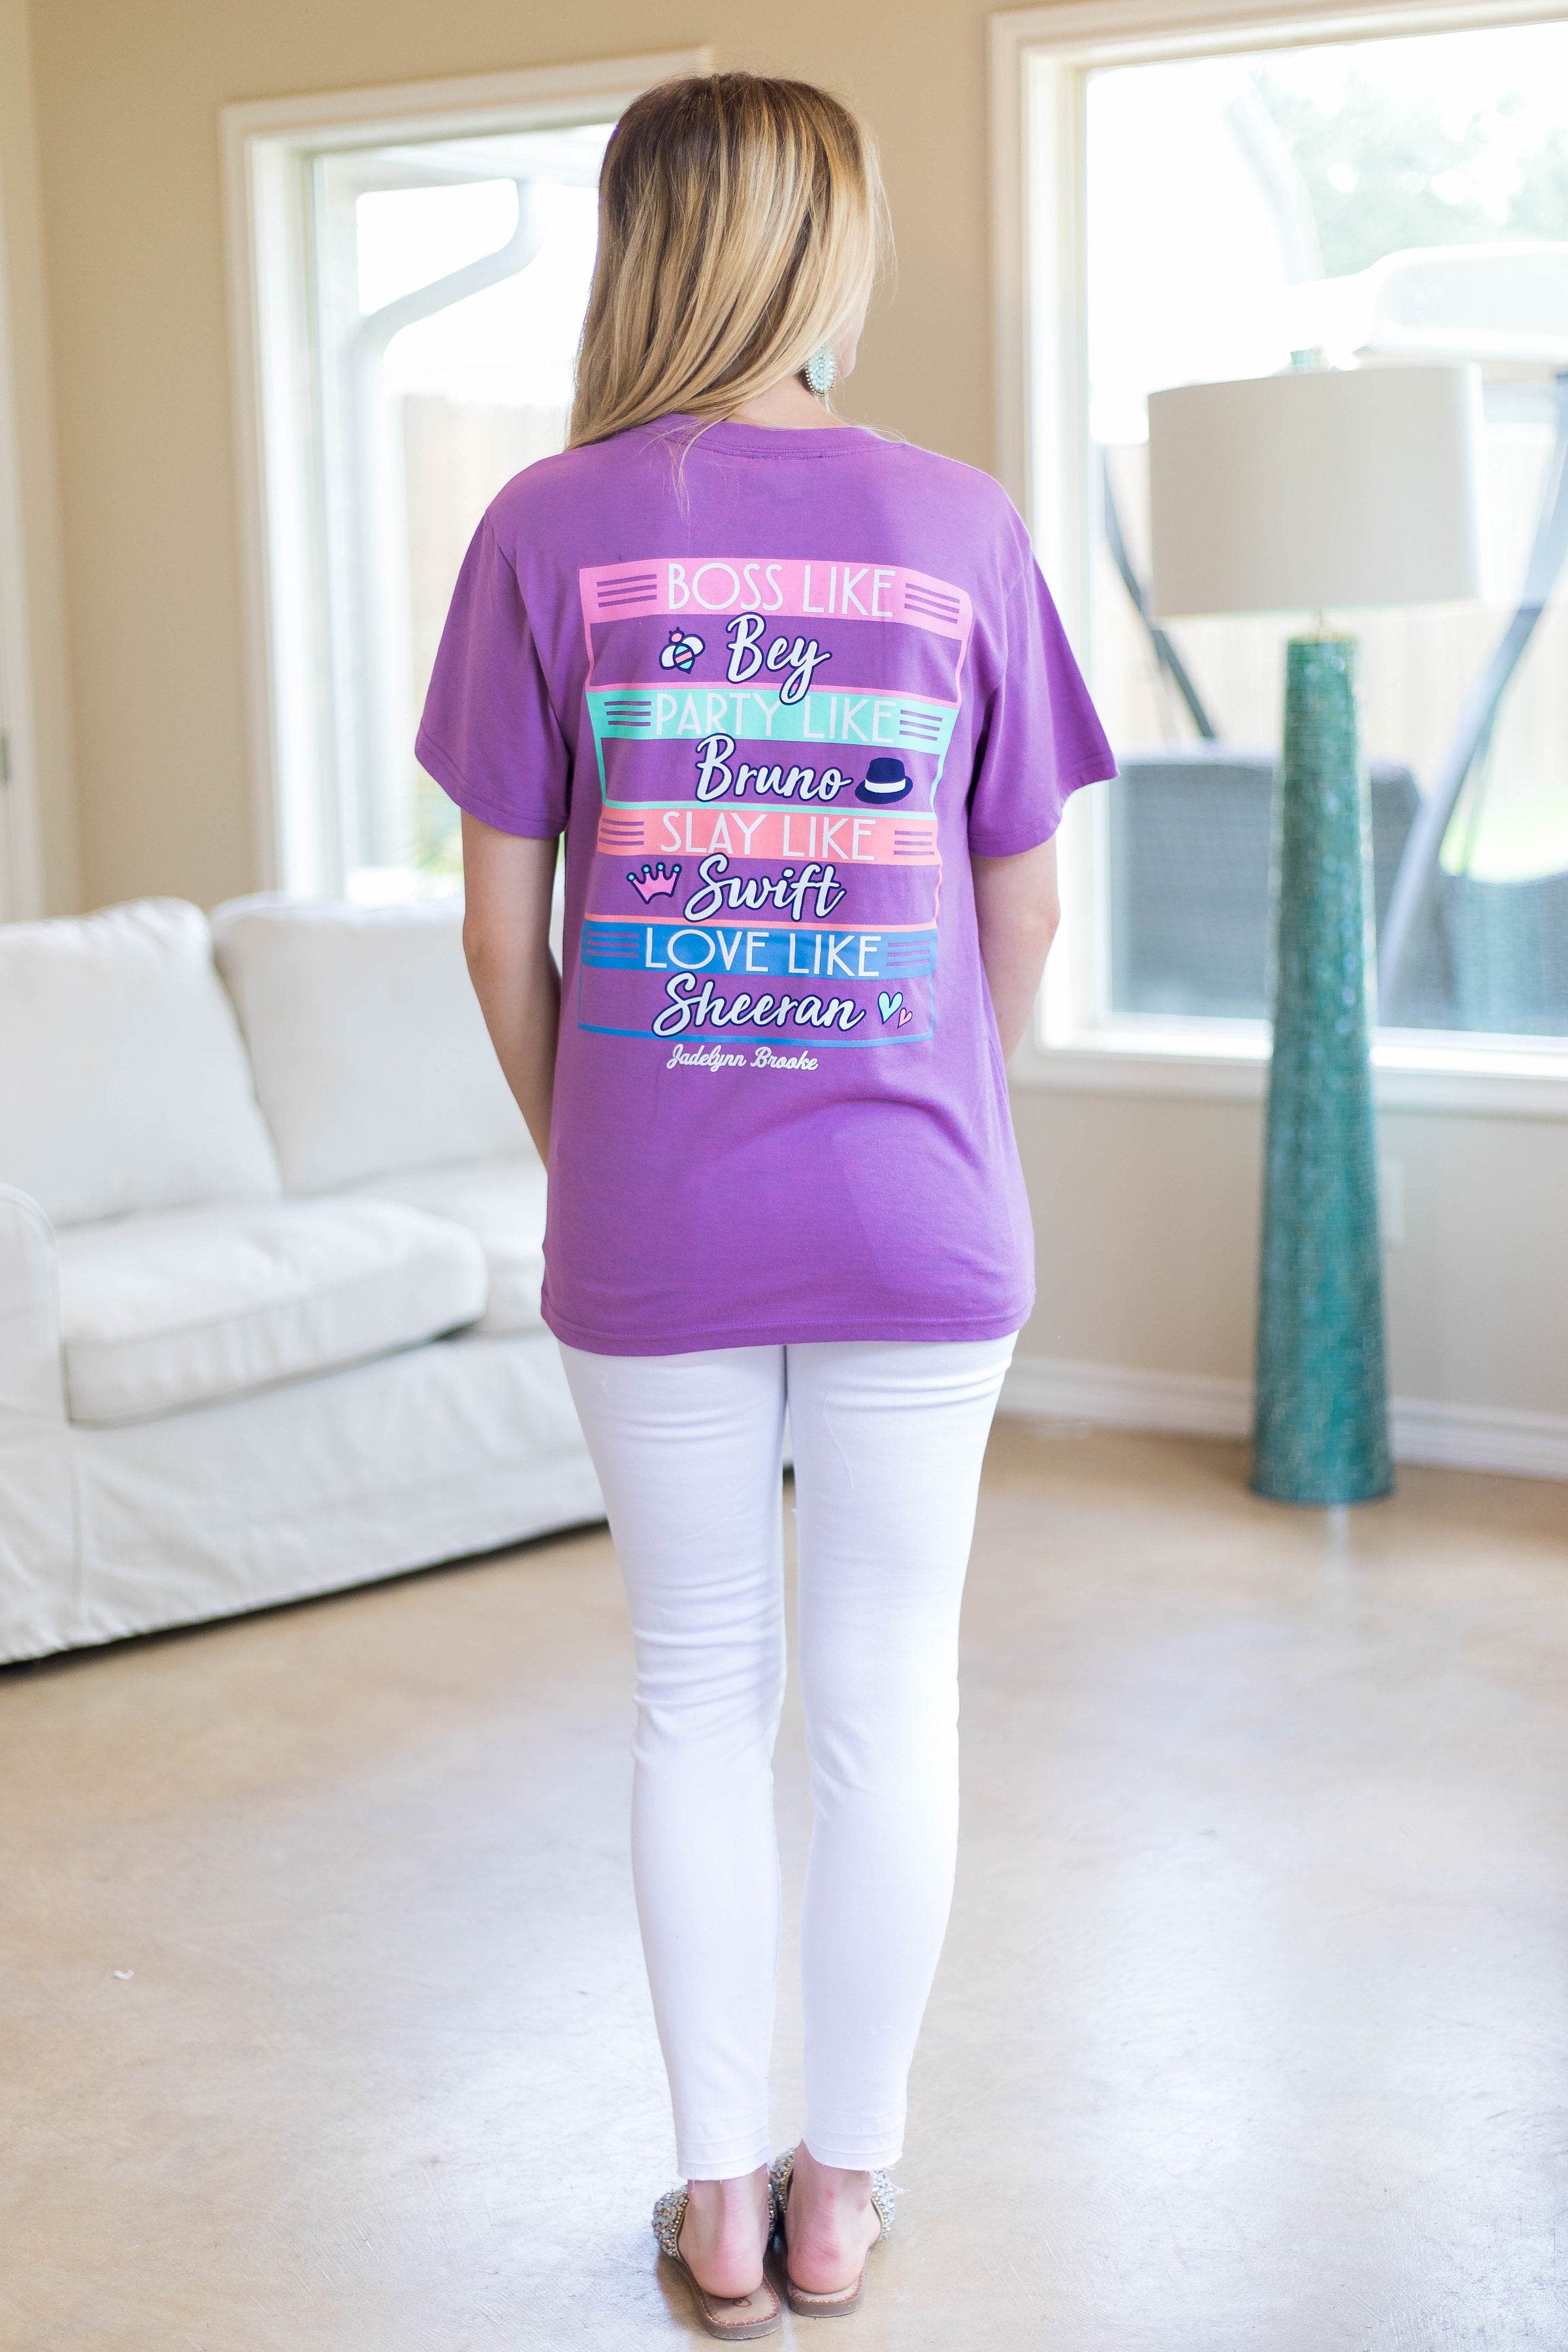 Drop The Mic Short Sleeve Tee Shirt in Purple - Giddy Up Glamour Boutique